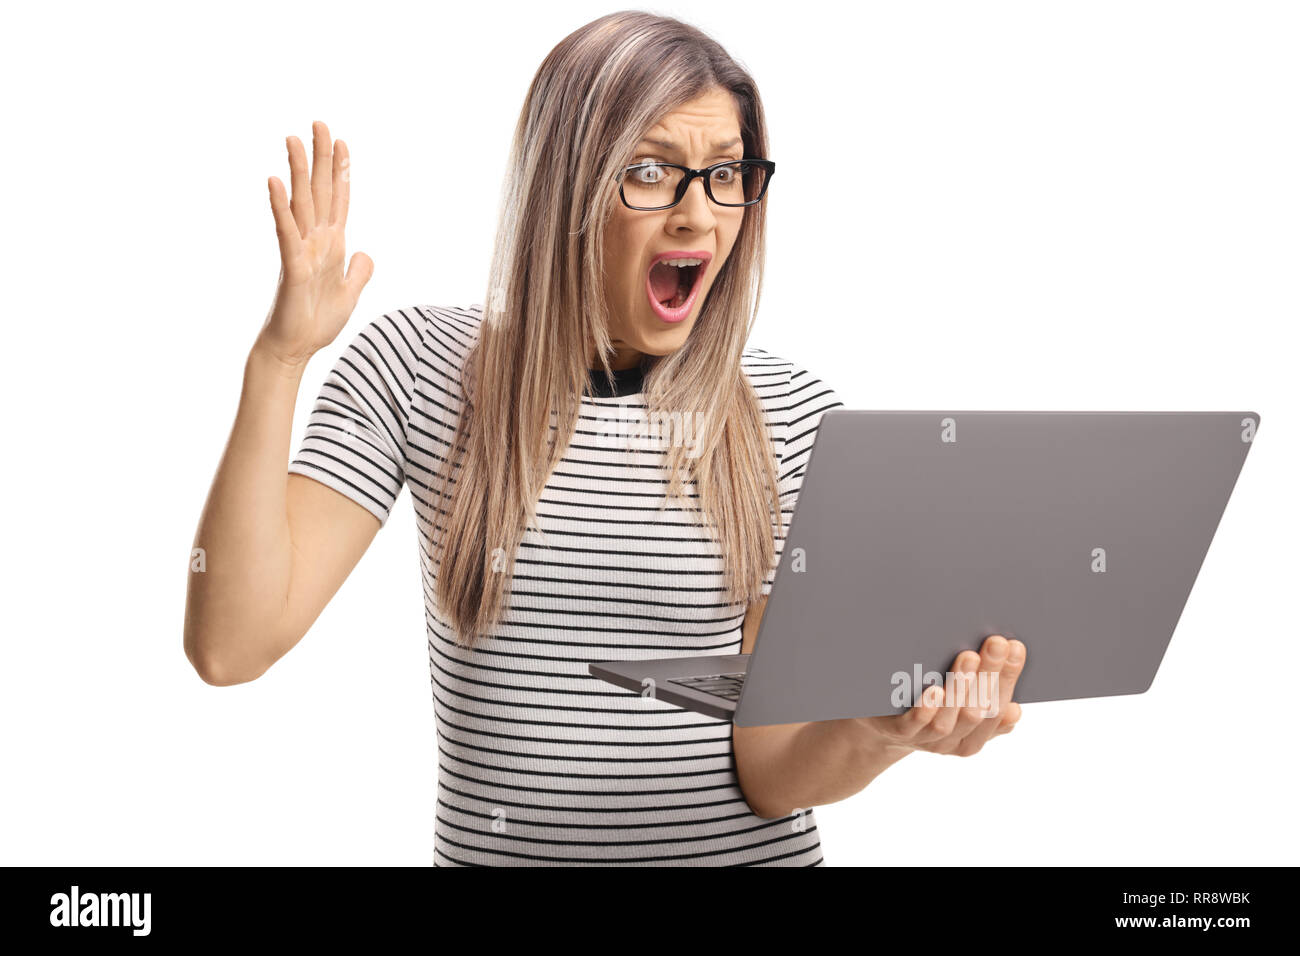 Shocked blond woman looking at a laptop computer isolated on white background Stock Photo